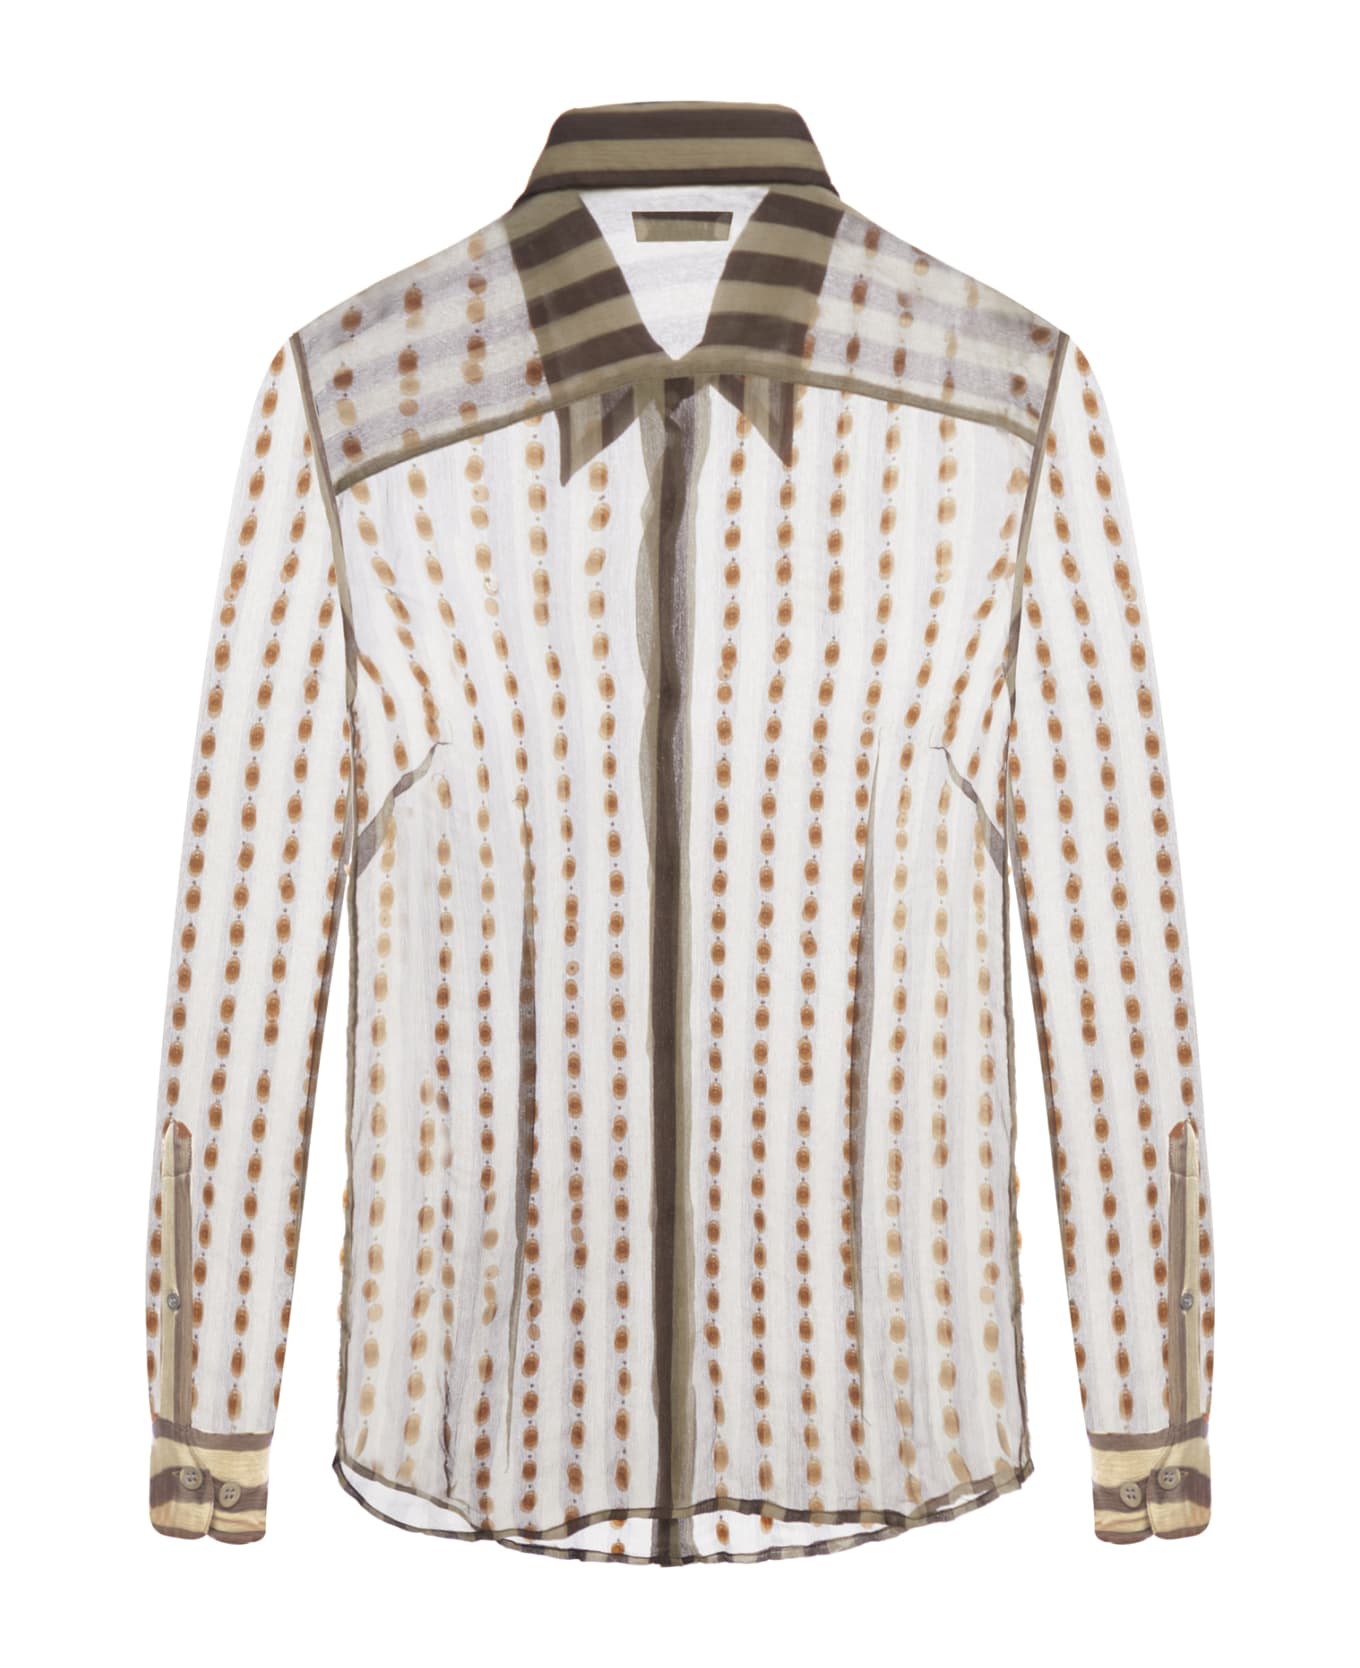 Dries Van Noten 00810-chowy Emb 8105 W.w.shirt Silk Mousseline Printed With Bicolor Stripes - Brown シャツ